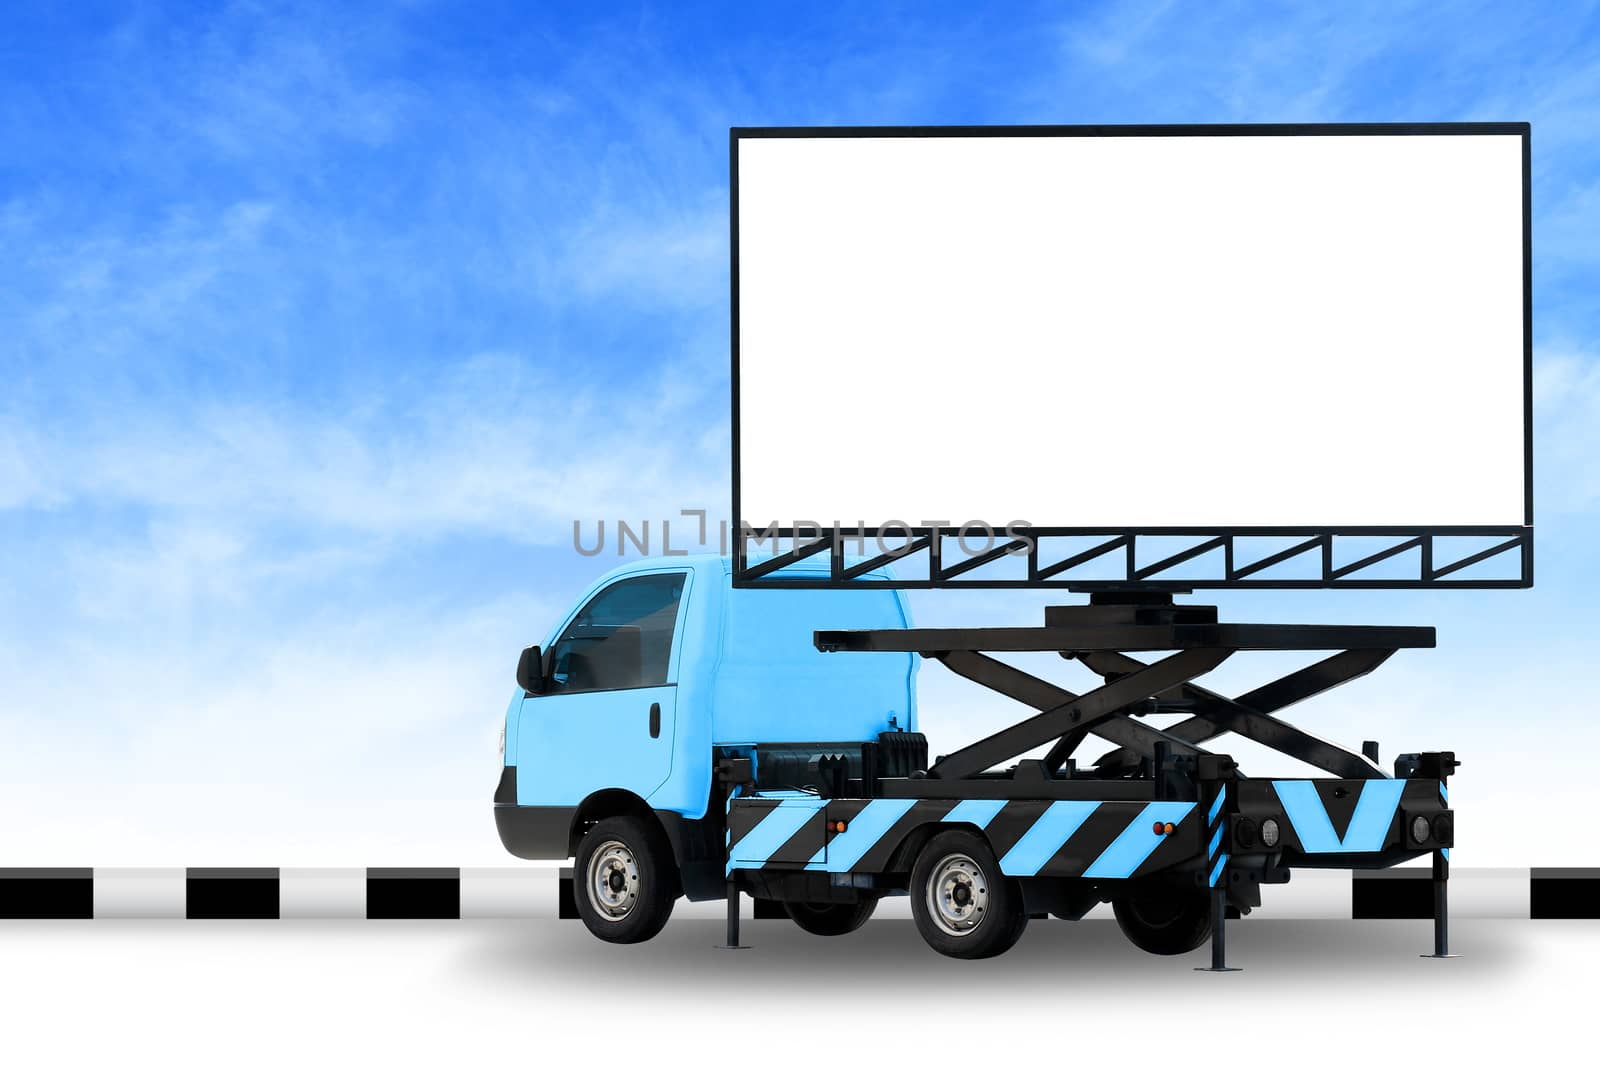 Billboard blank on car blue truck LED panel for sign Advertising isolated on background sky, Large banner and billboard Roadside for an advertisement large by cgdeaw